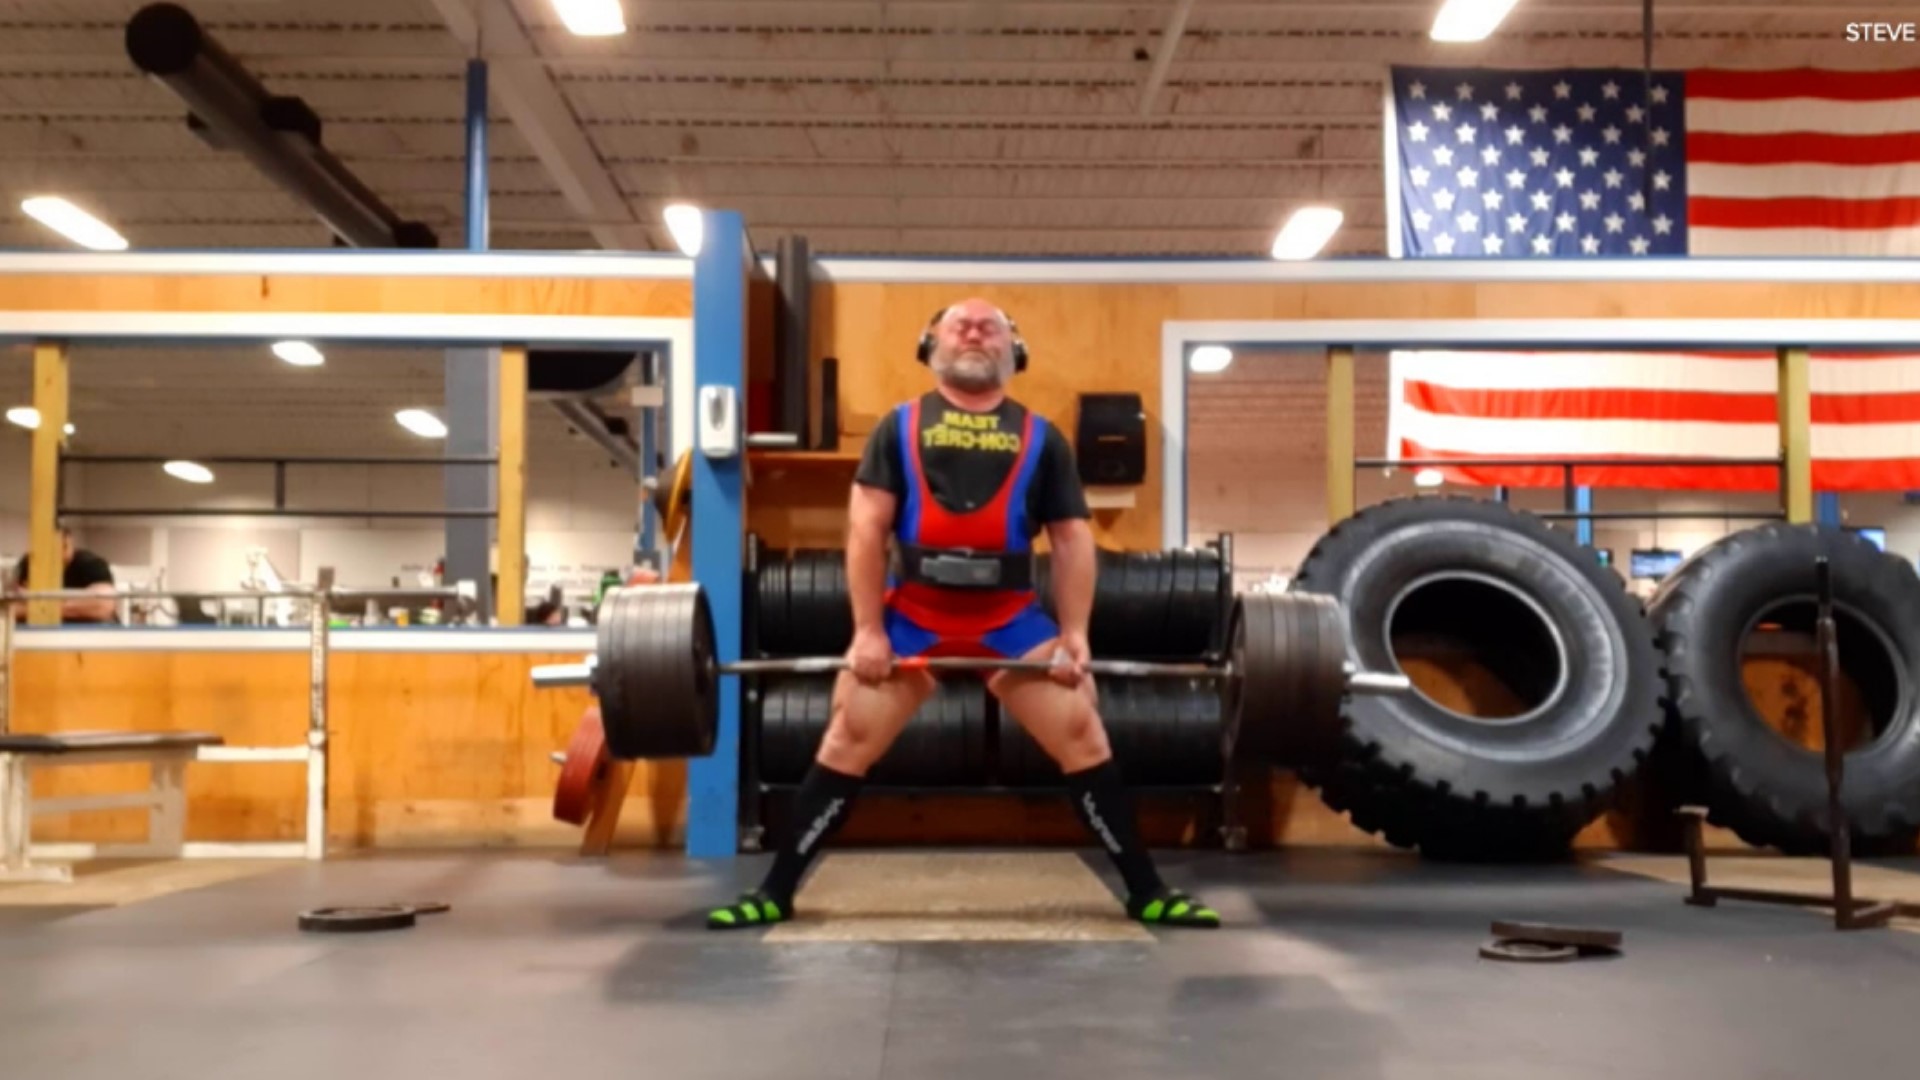 Despite being the oldest competitor in the heavyweight division, Steve Mann said he's nowhere close to the end of his powerlifting career.